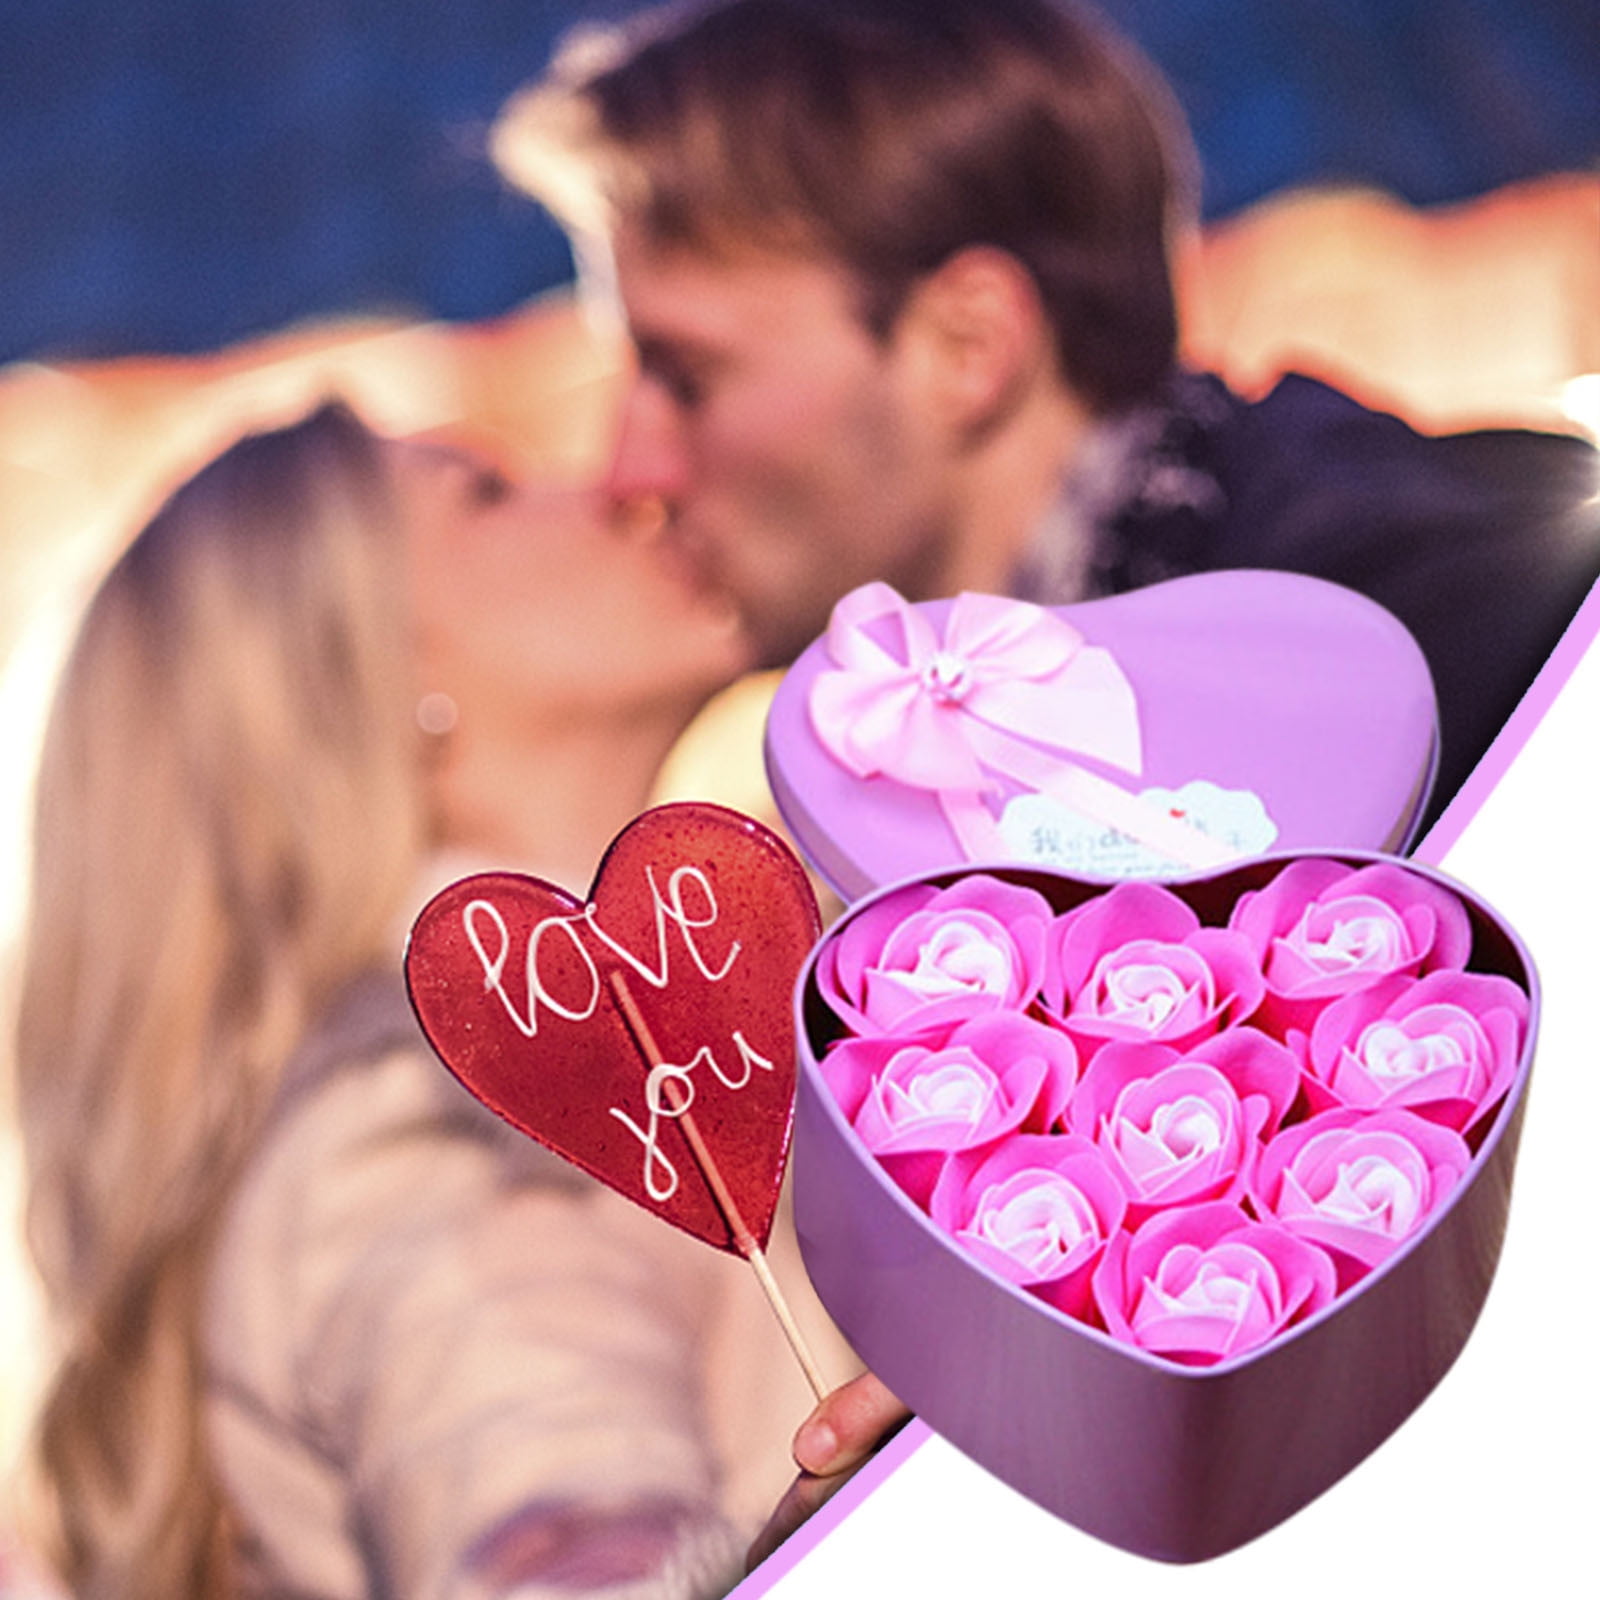 How to Find the Best Valentine's Day Gift for Him? - Sendbestgift.com